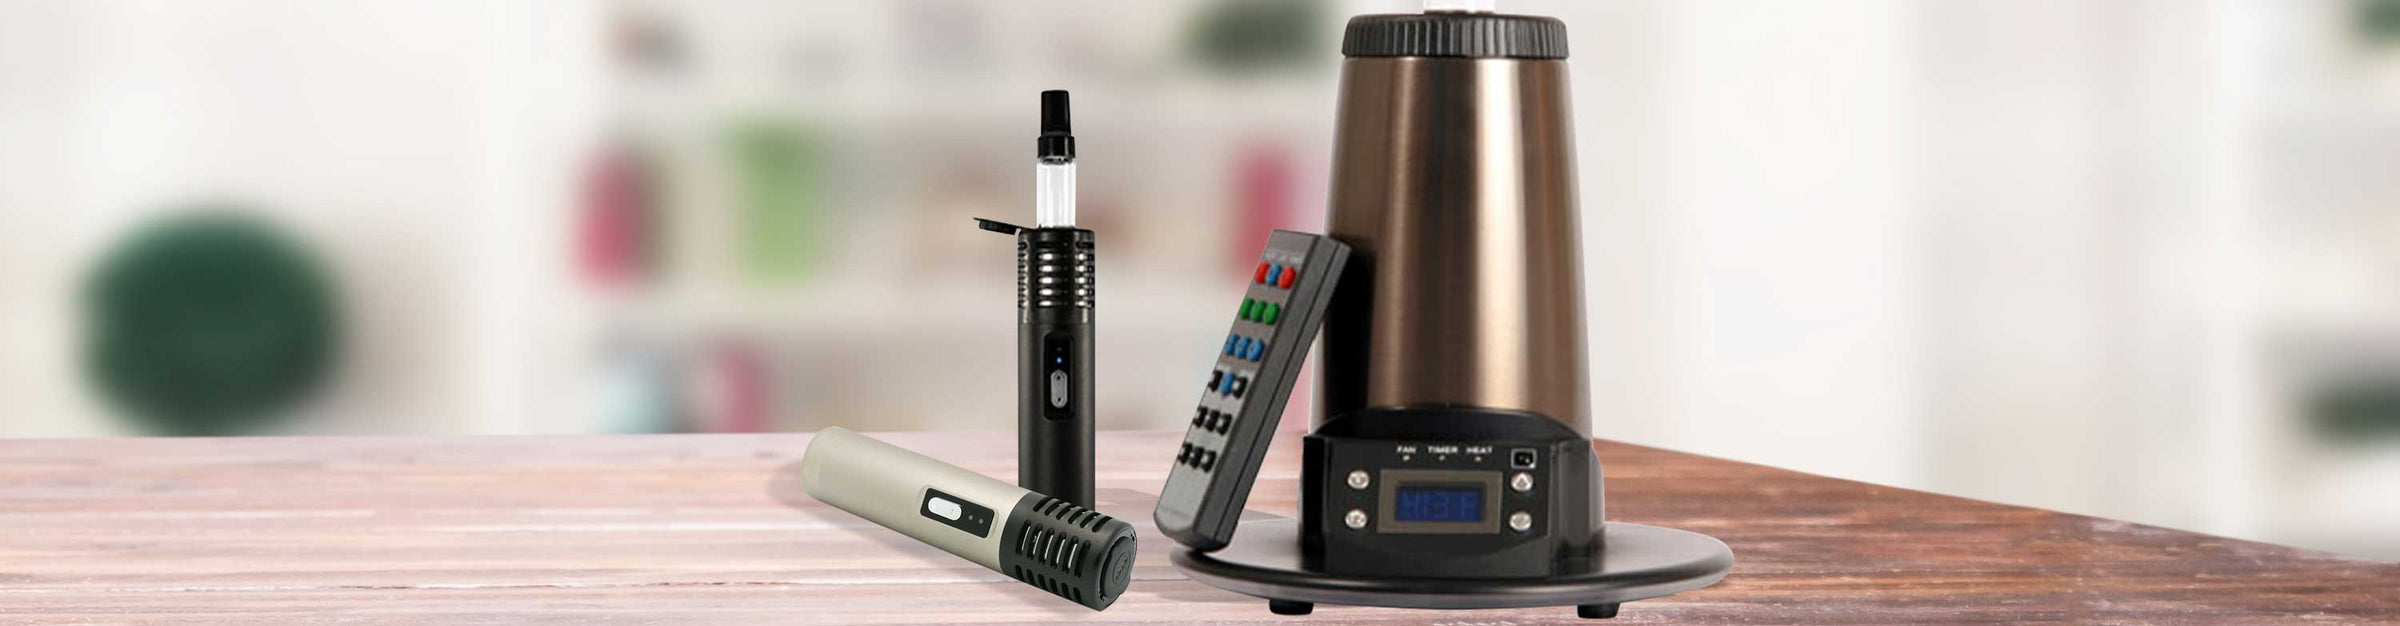 Arizer products standing on kitchen table in home.